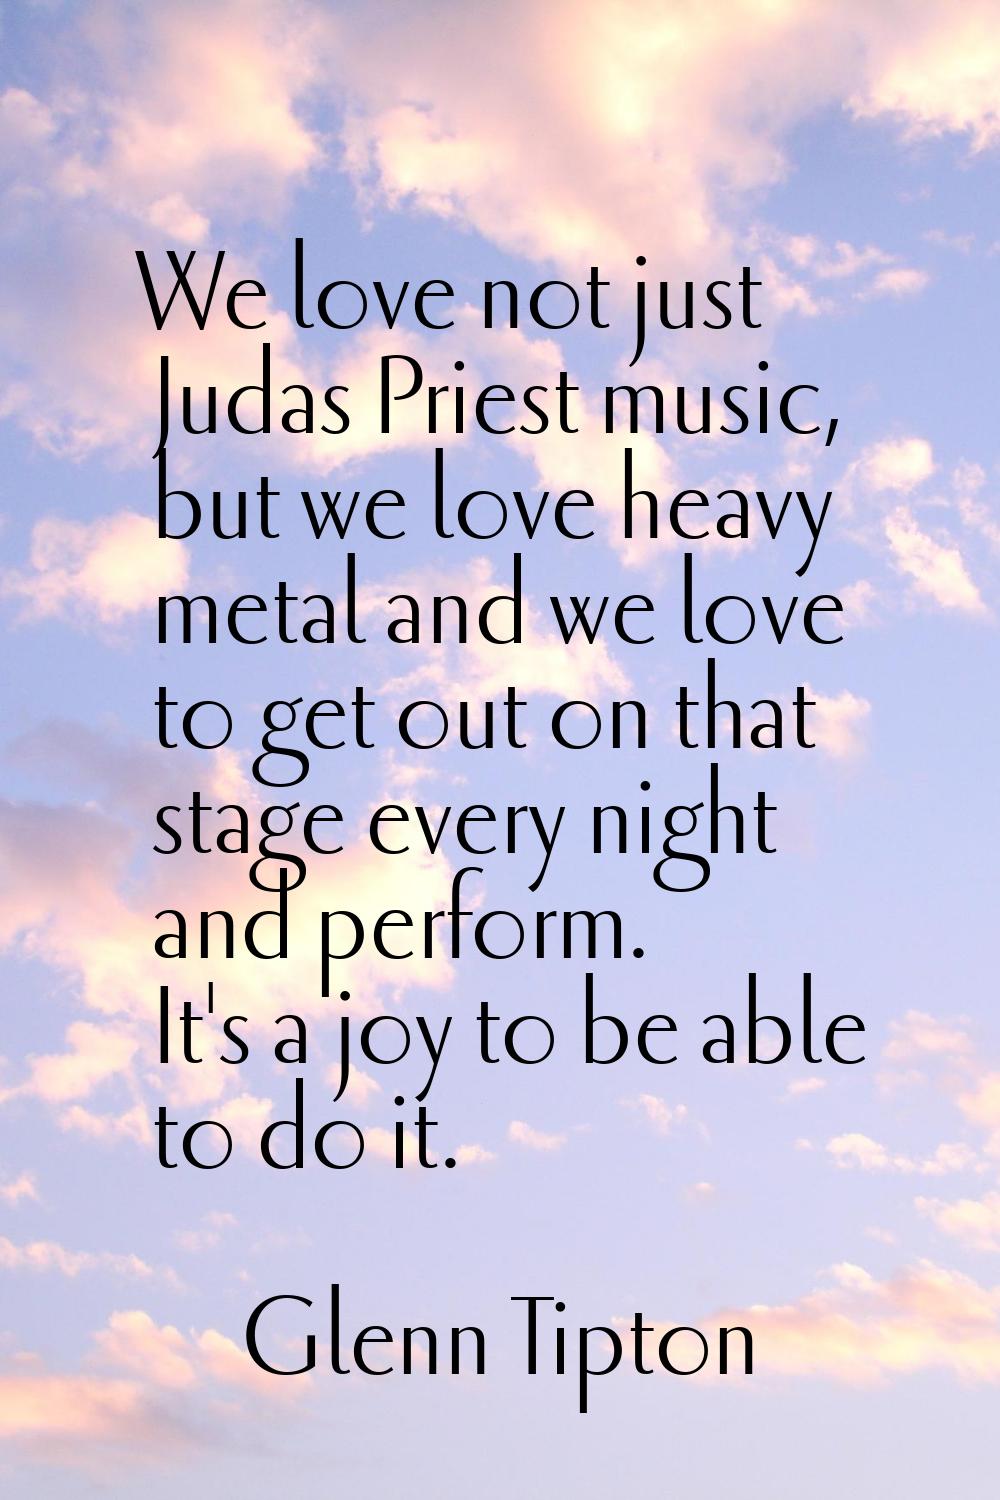 We love not just Judas Priest music, but we love heavy metal and we love to get out on that stage e